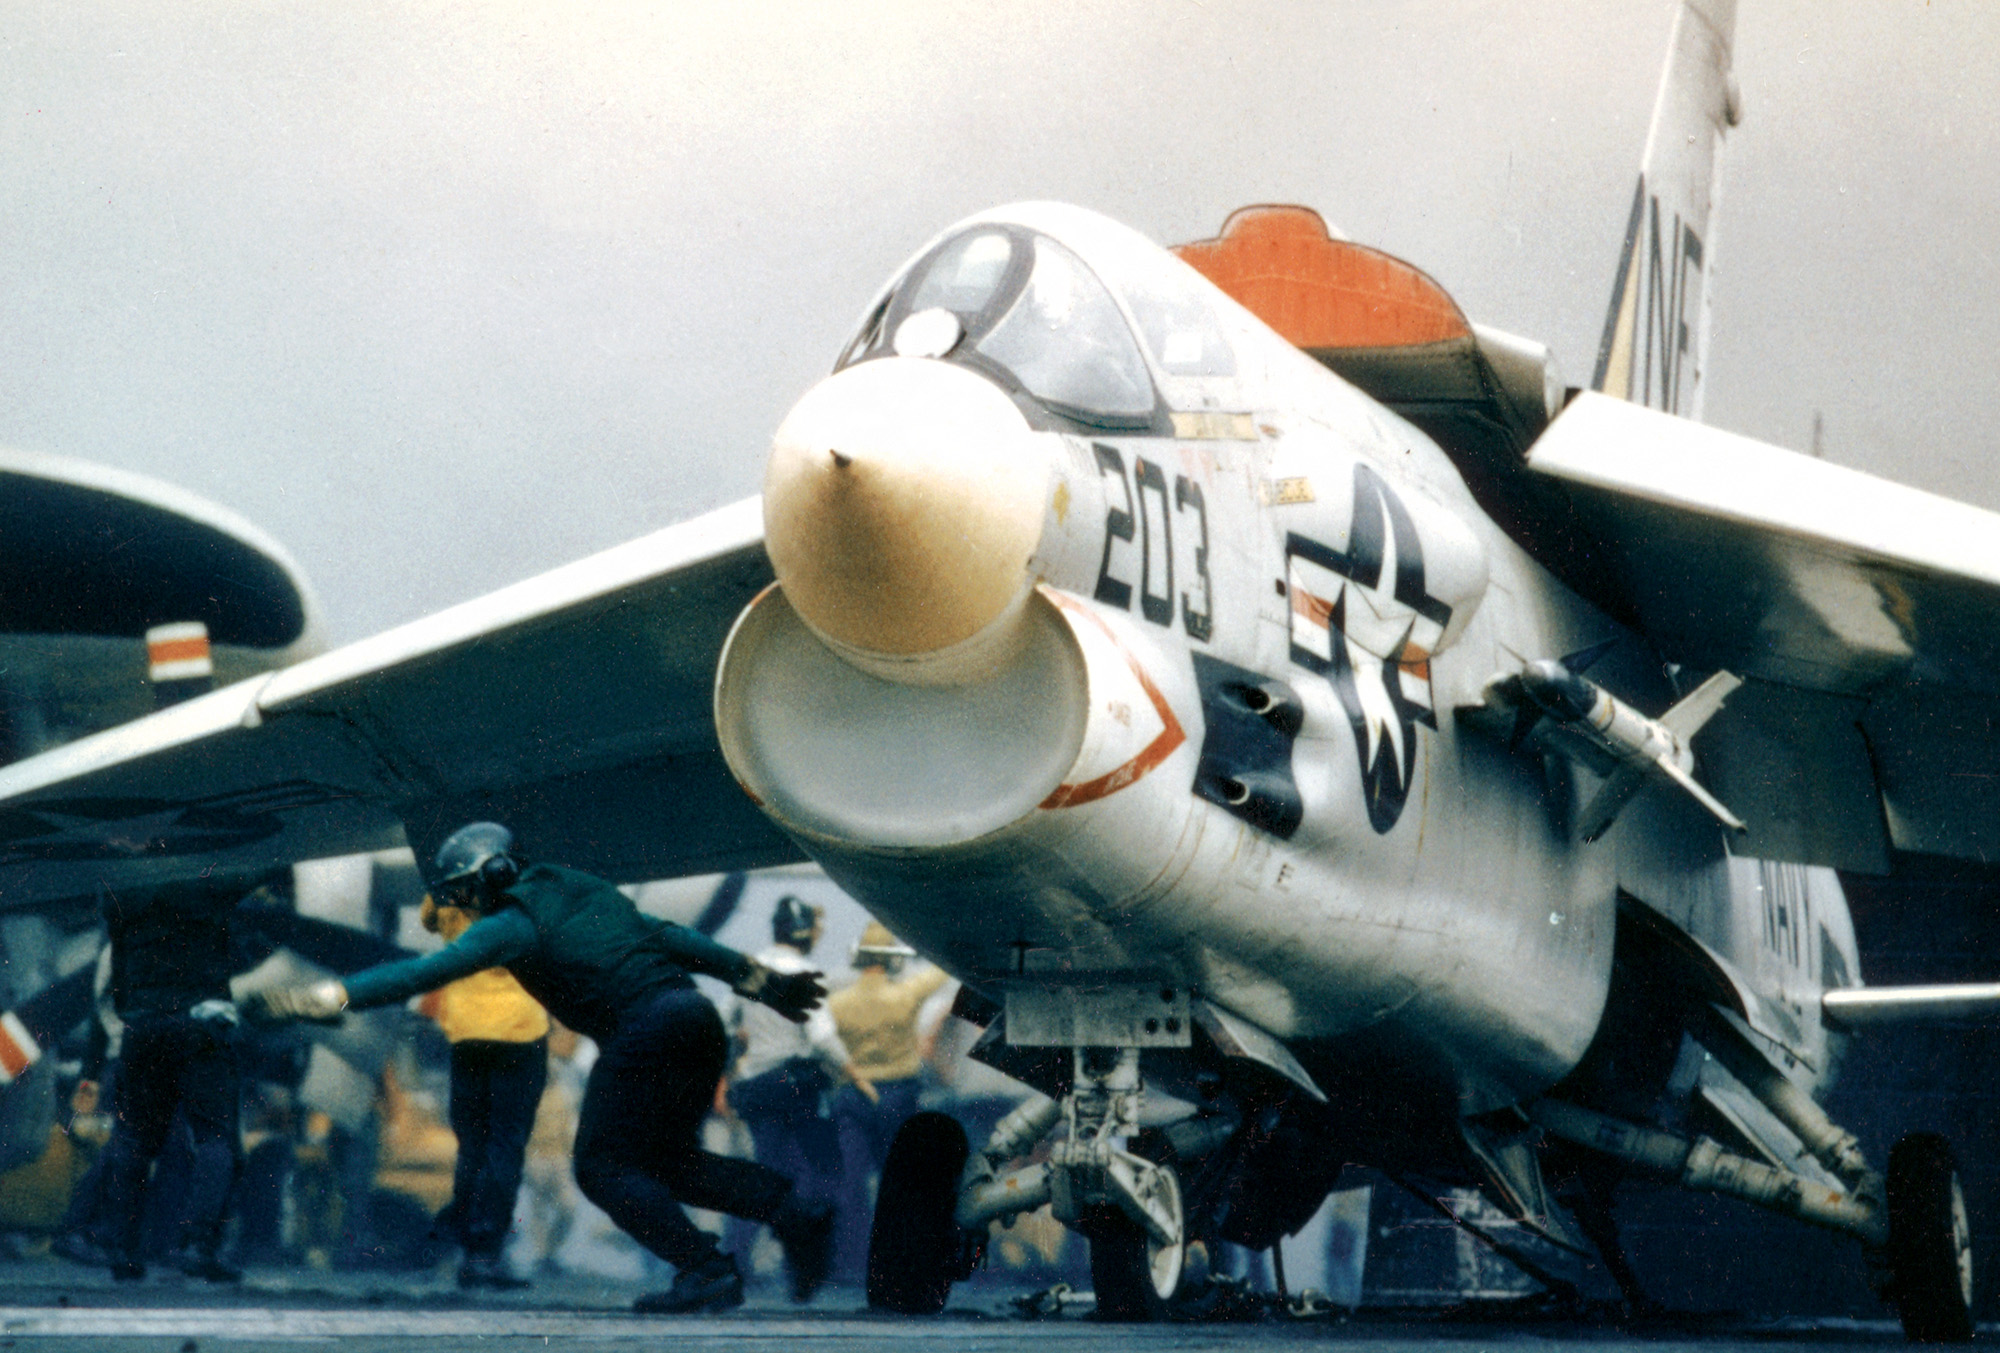 Vought’s F-8 Crusader successfully bridged the gap between the days of